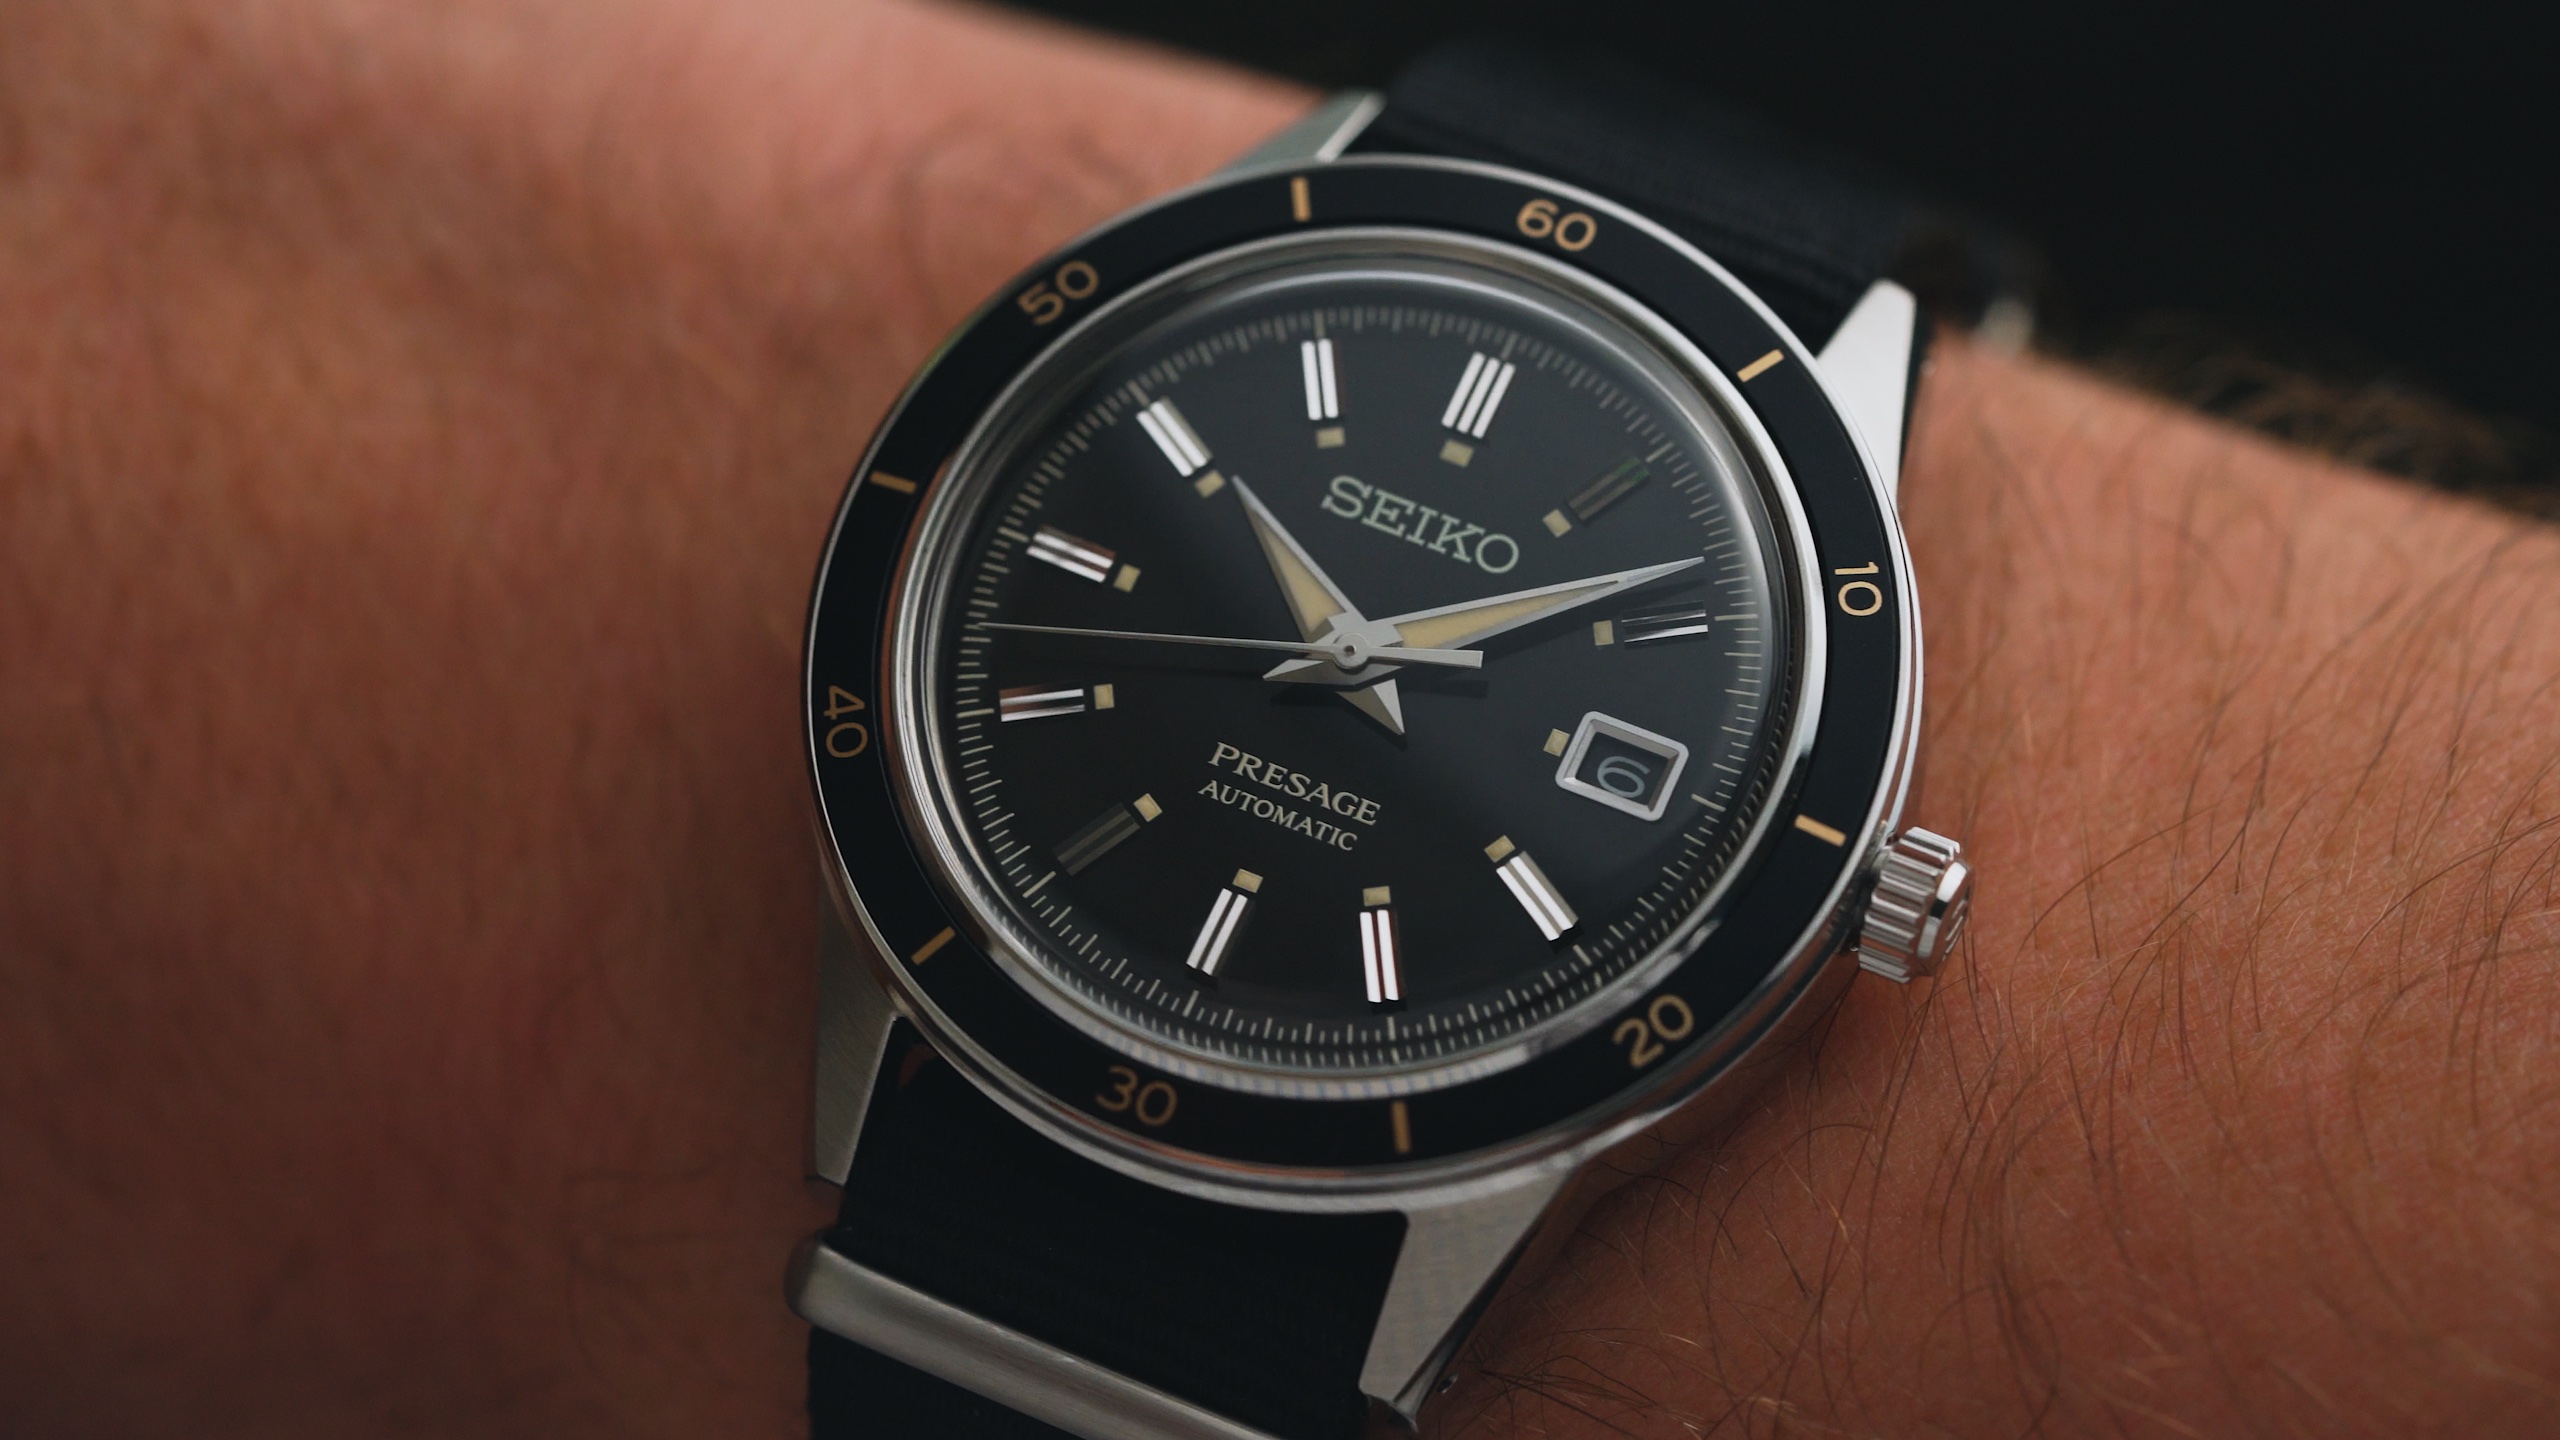 The Seiko Presage Style 60's is a slick everyday watch with a dapper edge